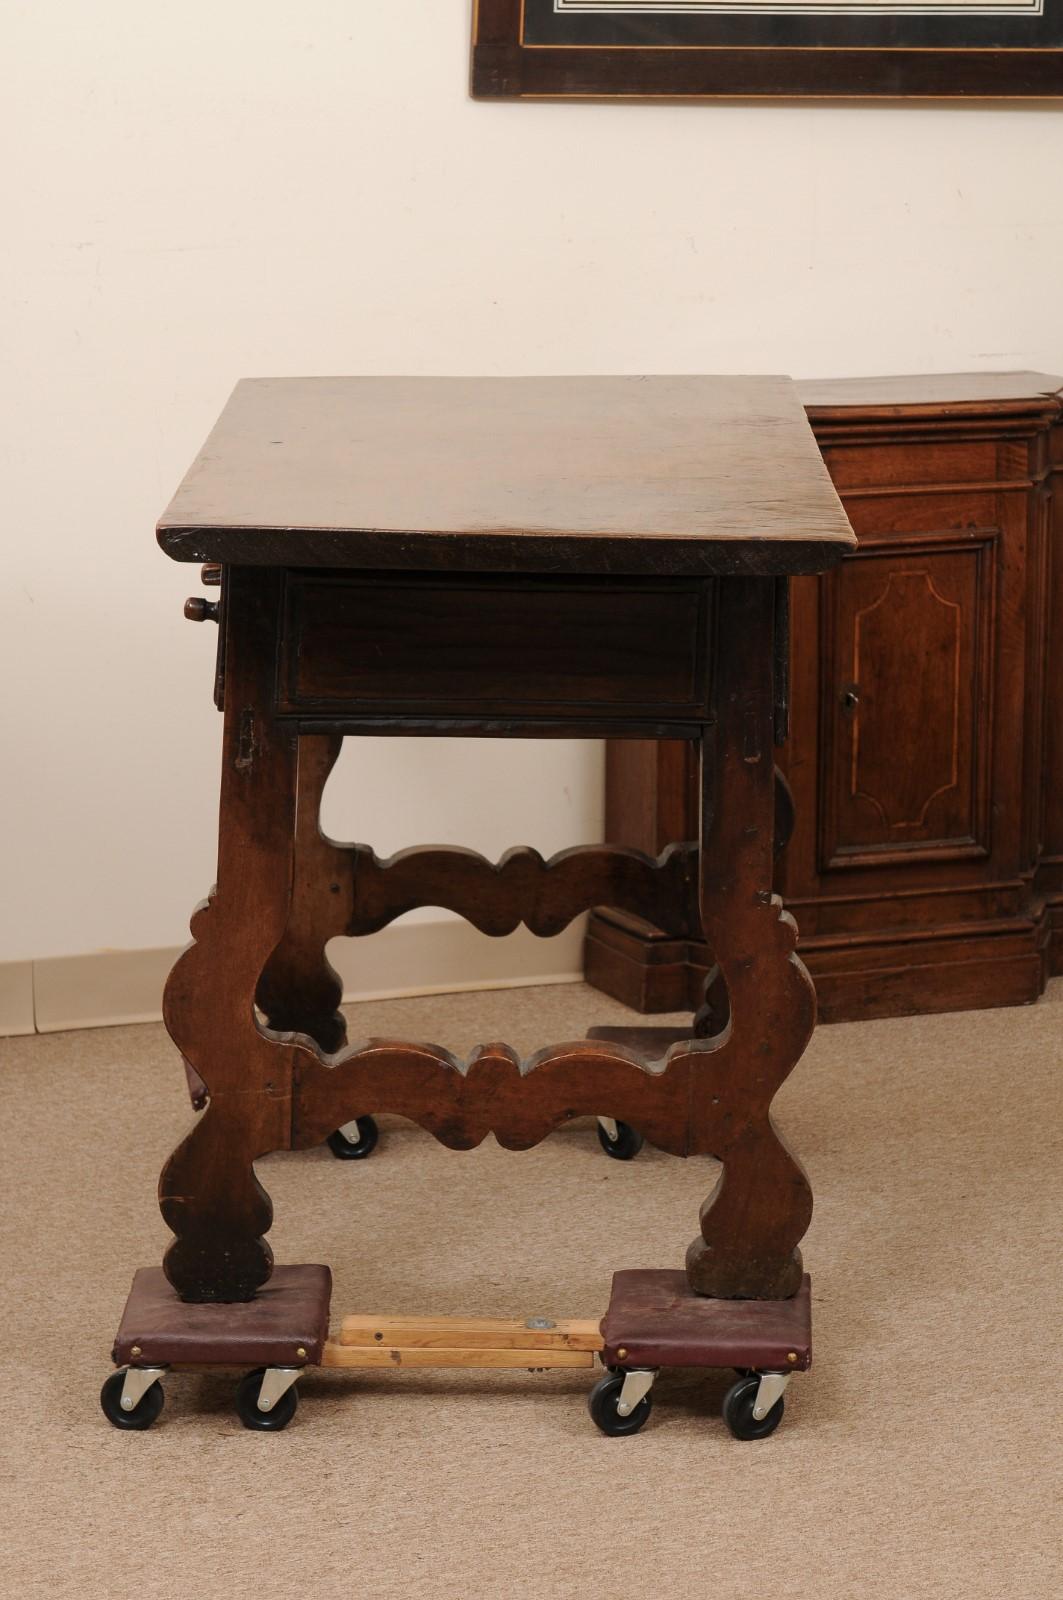 Spanish Walnut Console Table with 2 Drawers and Lyre Legs, Early 18th Century For Sale 9